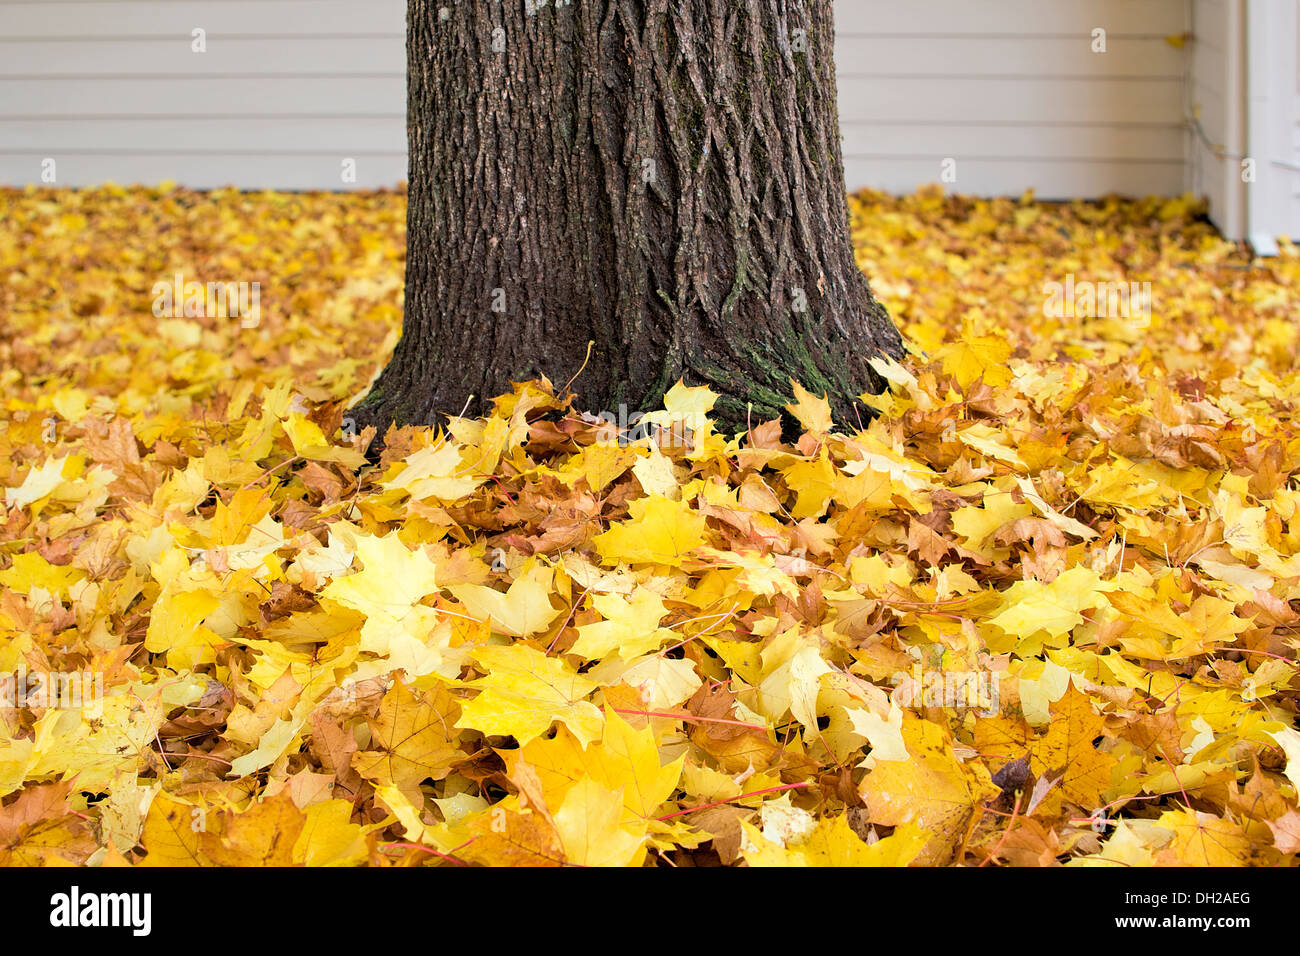 Fallen Maple Tree Leaves by Tree Trunk Piled Up on Backyard Ground in Autumn Background Stock Photo